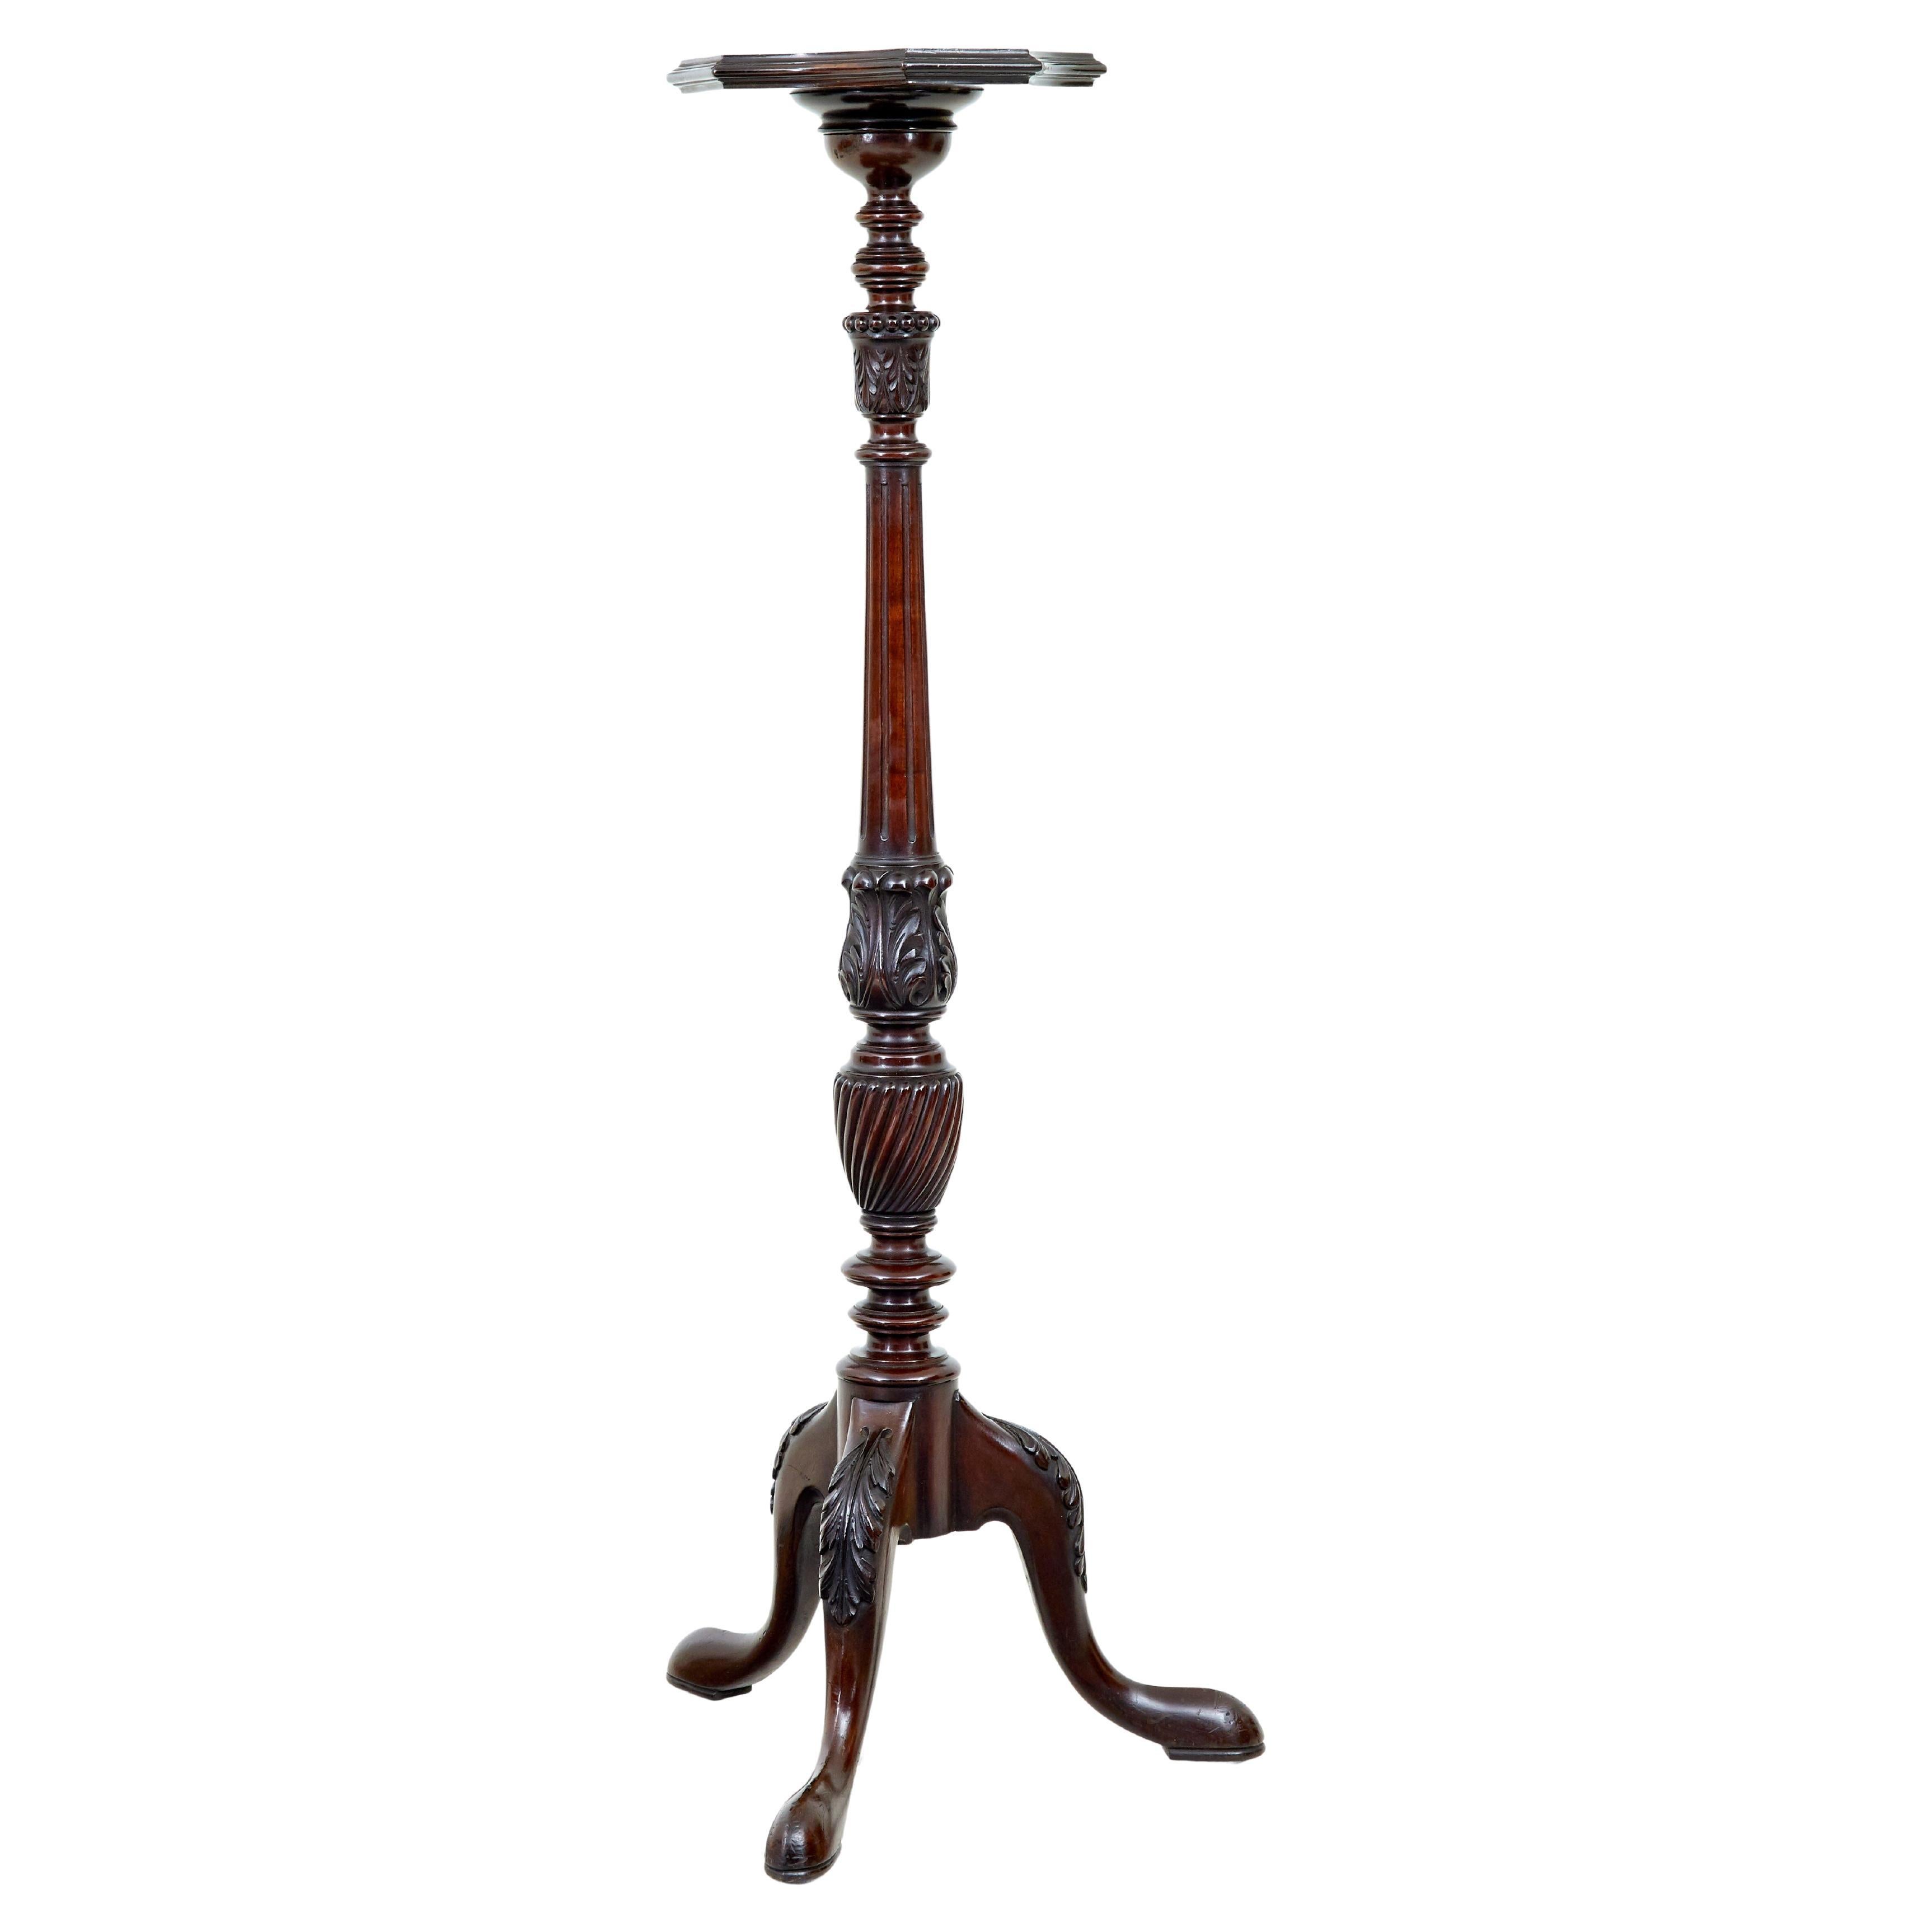 Early 20th century carved mahogany pedestal stand